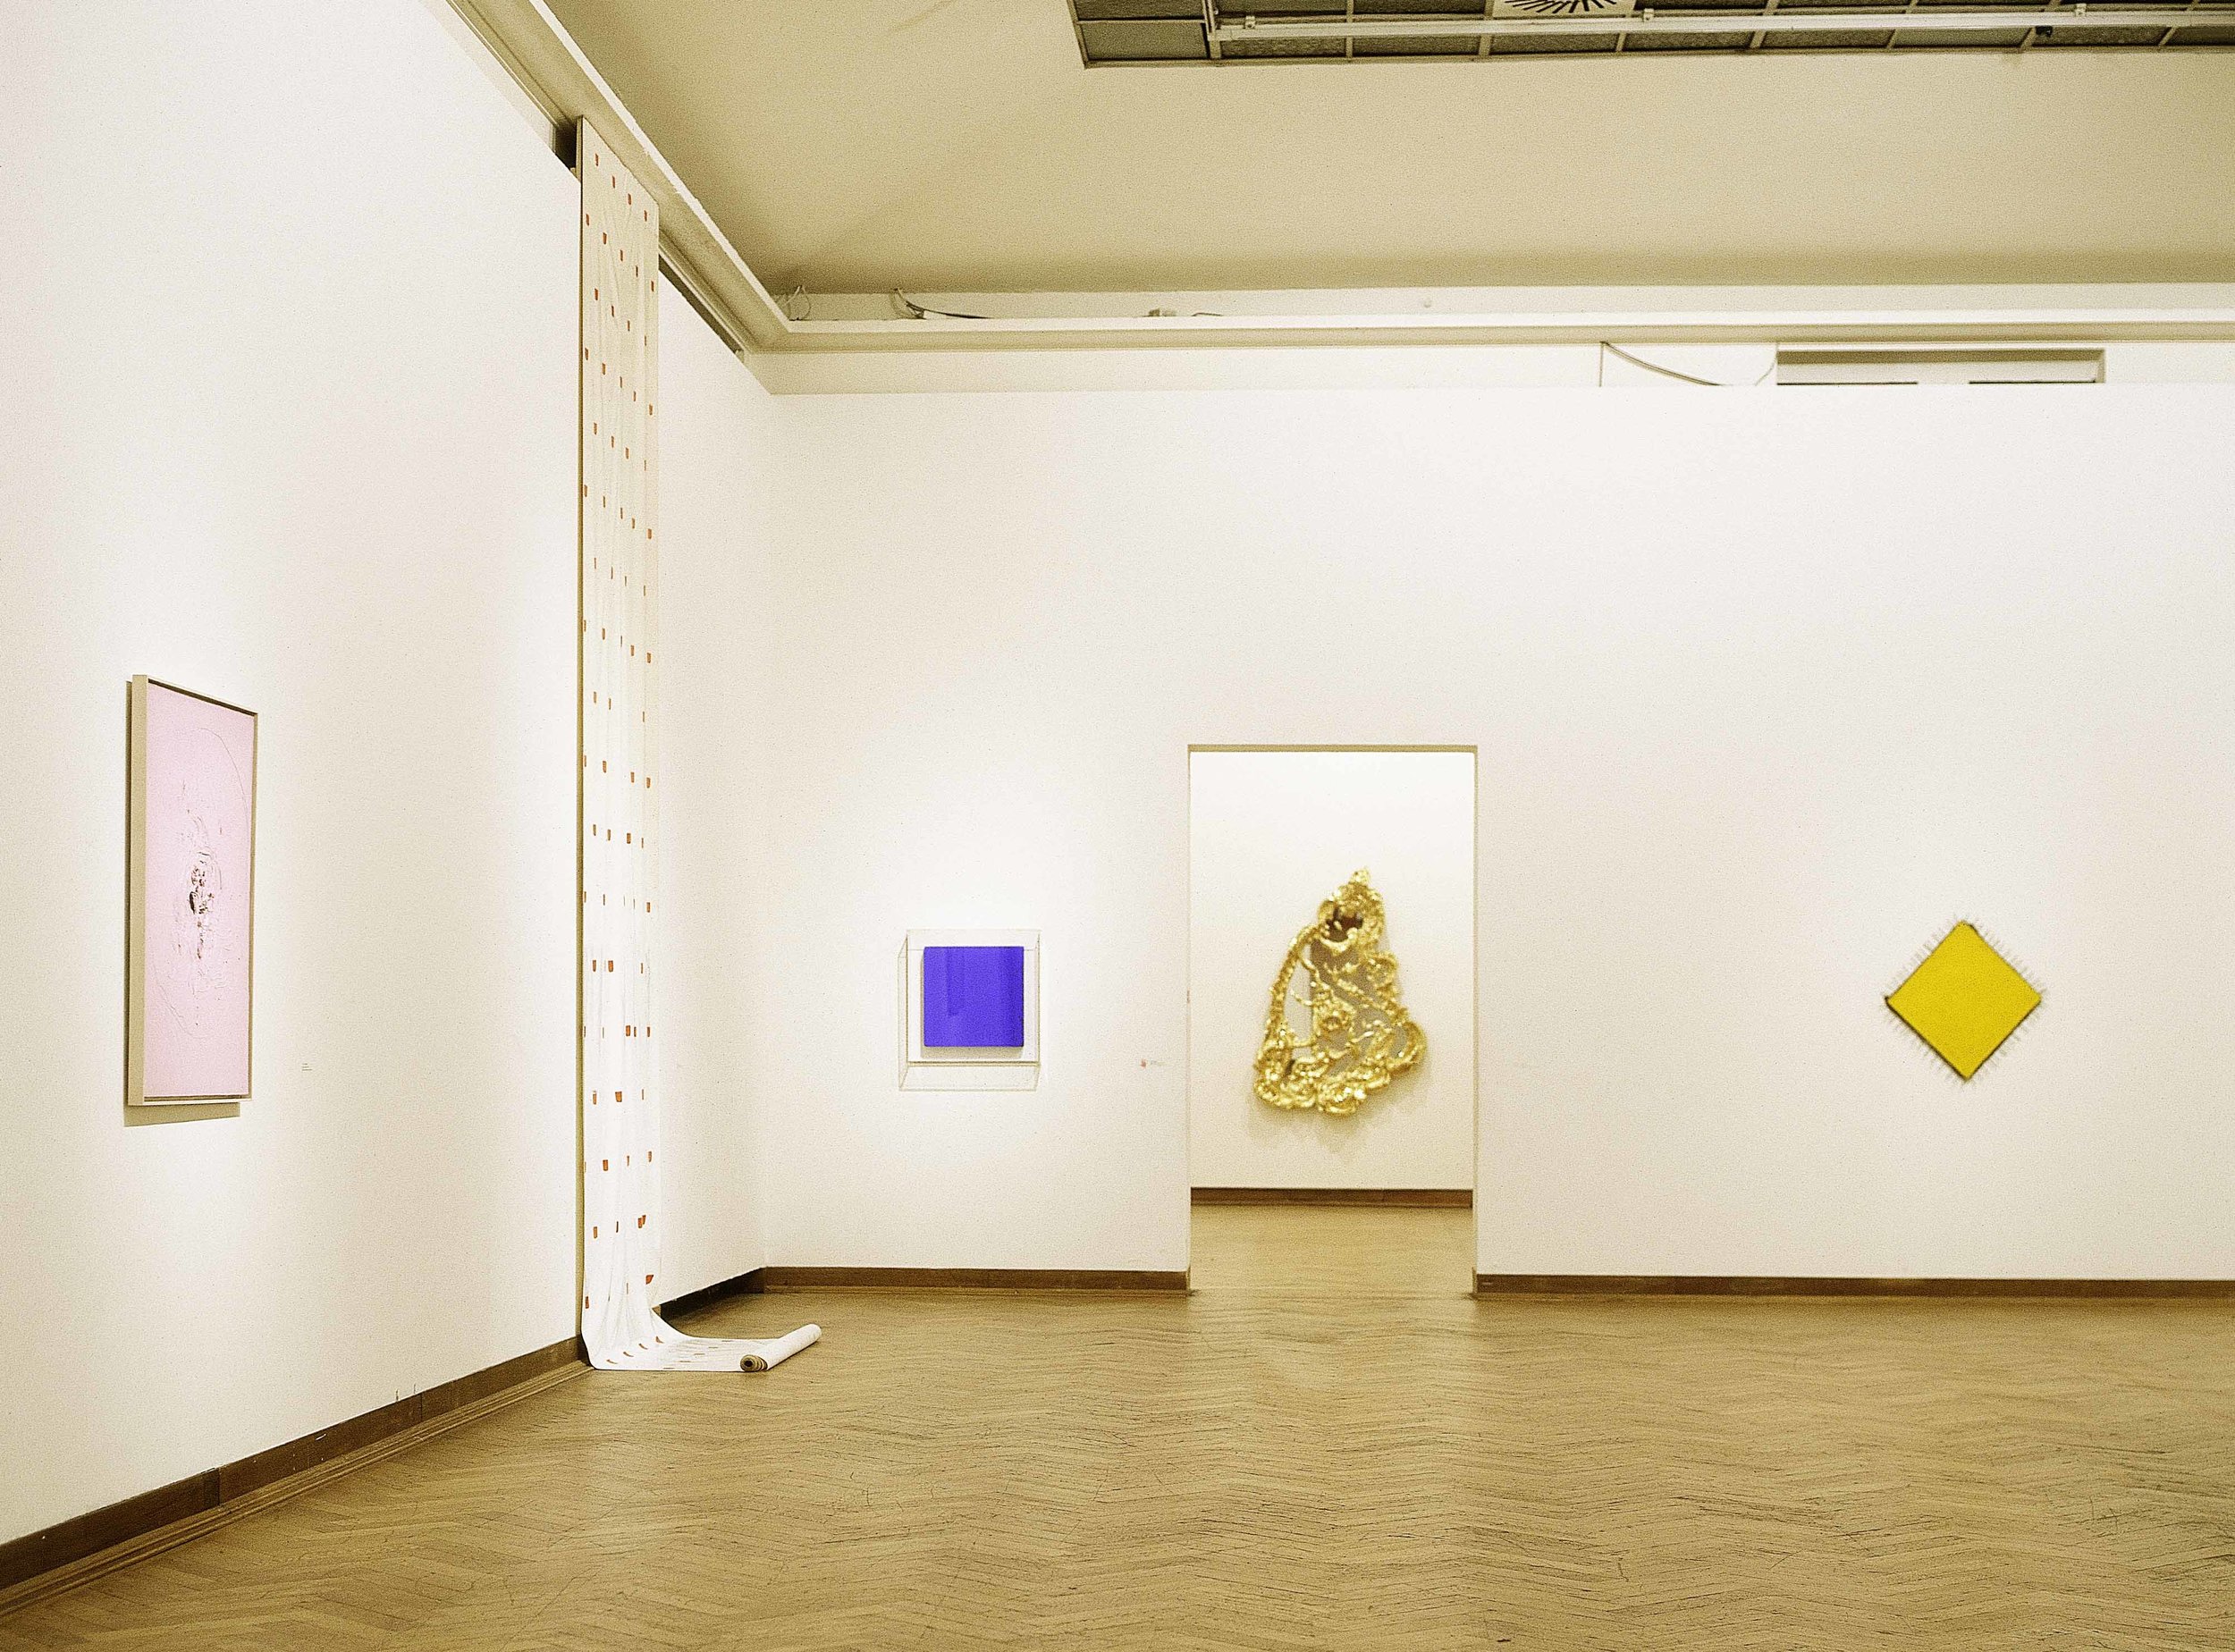   Vous voici, Face-to-Face : Works by Fontana, Toroni, Klein, Koons, Uecker. Photo Philippe De Gobert. 